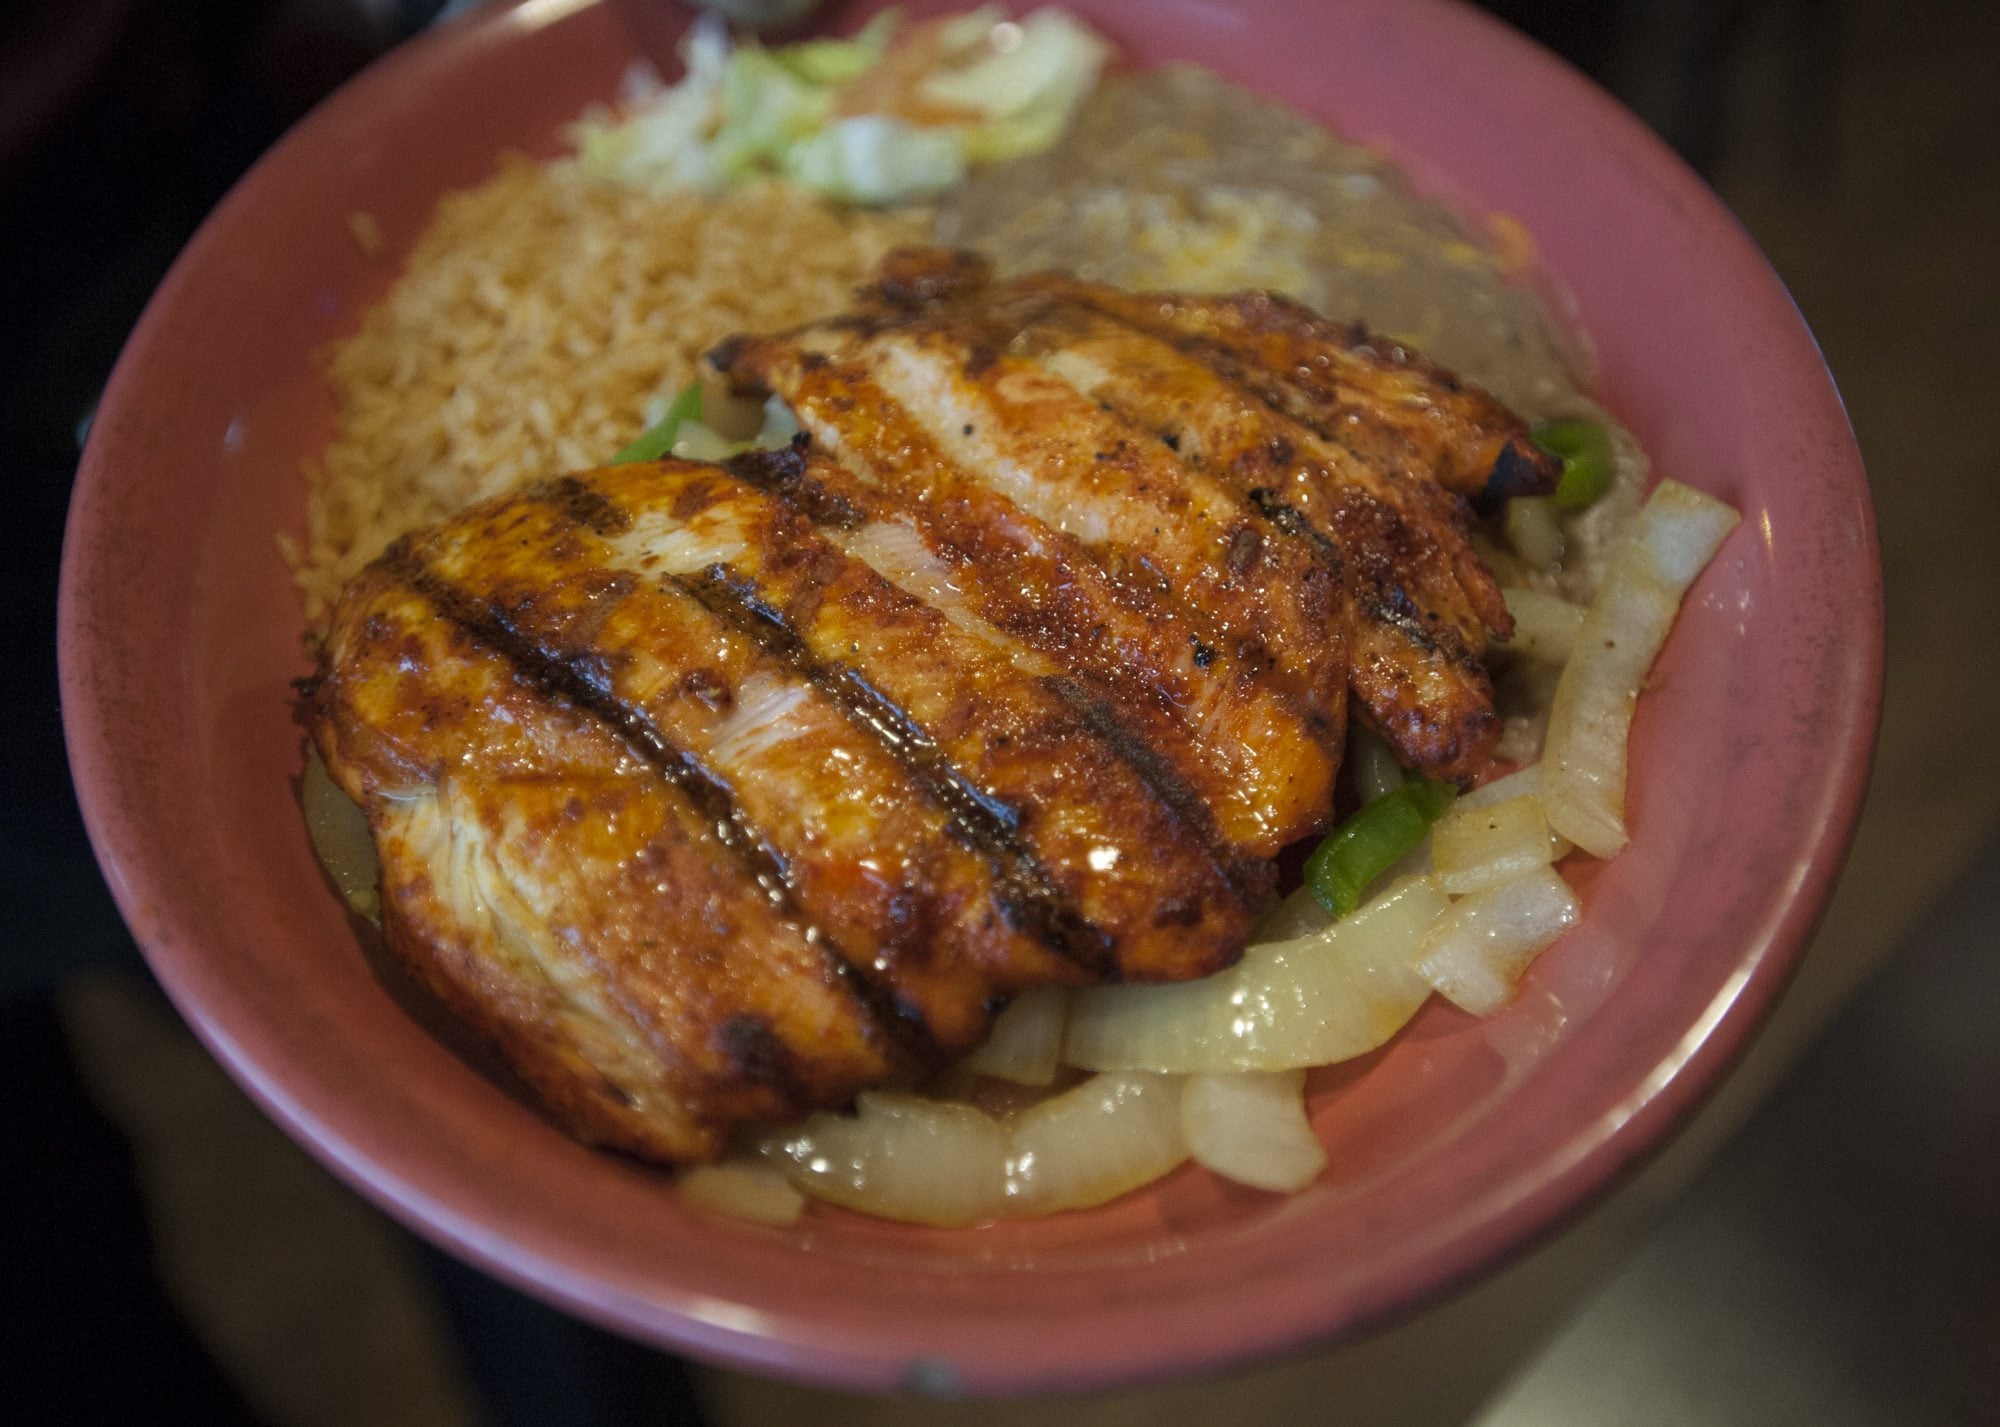 Pollo asado, a grilled boneless fillet of chicken with green pepper and mushrooms, is served Feb. 4 at Los Potrillos Mexican Restaurant in east Vacouver. The dish costs $15.95.